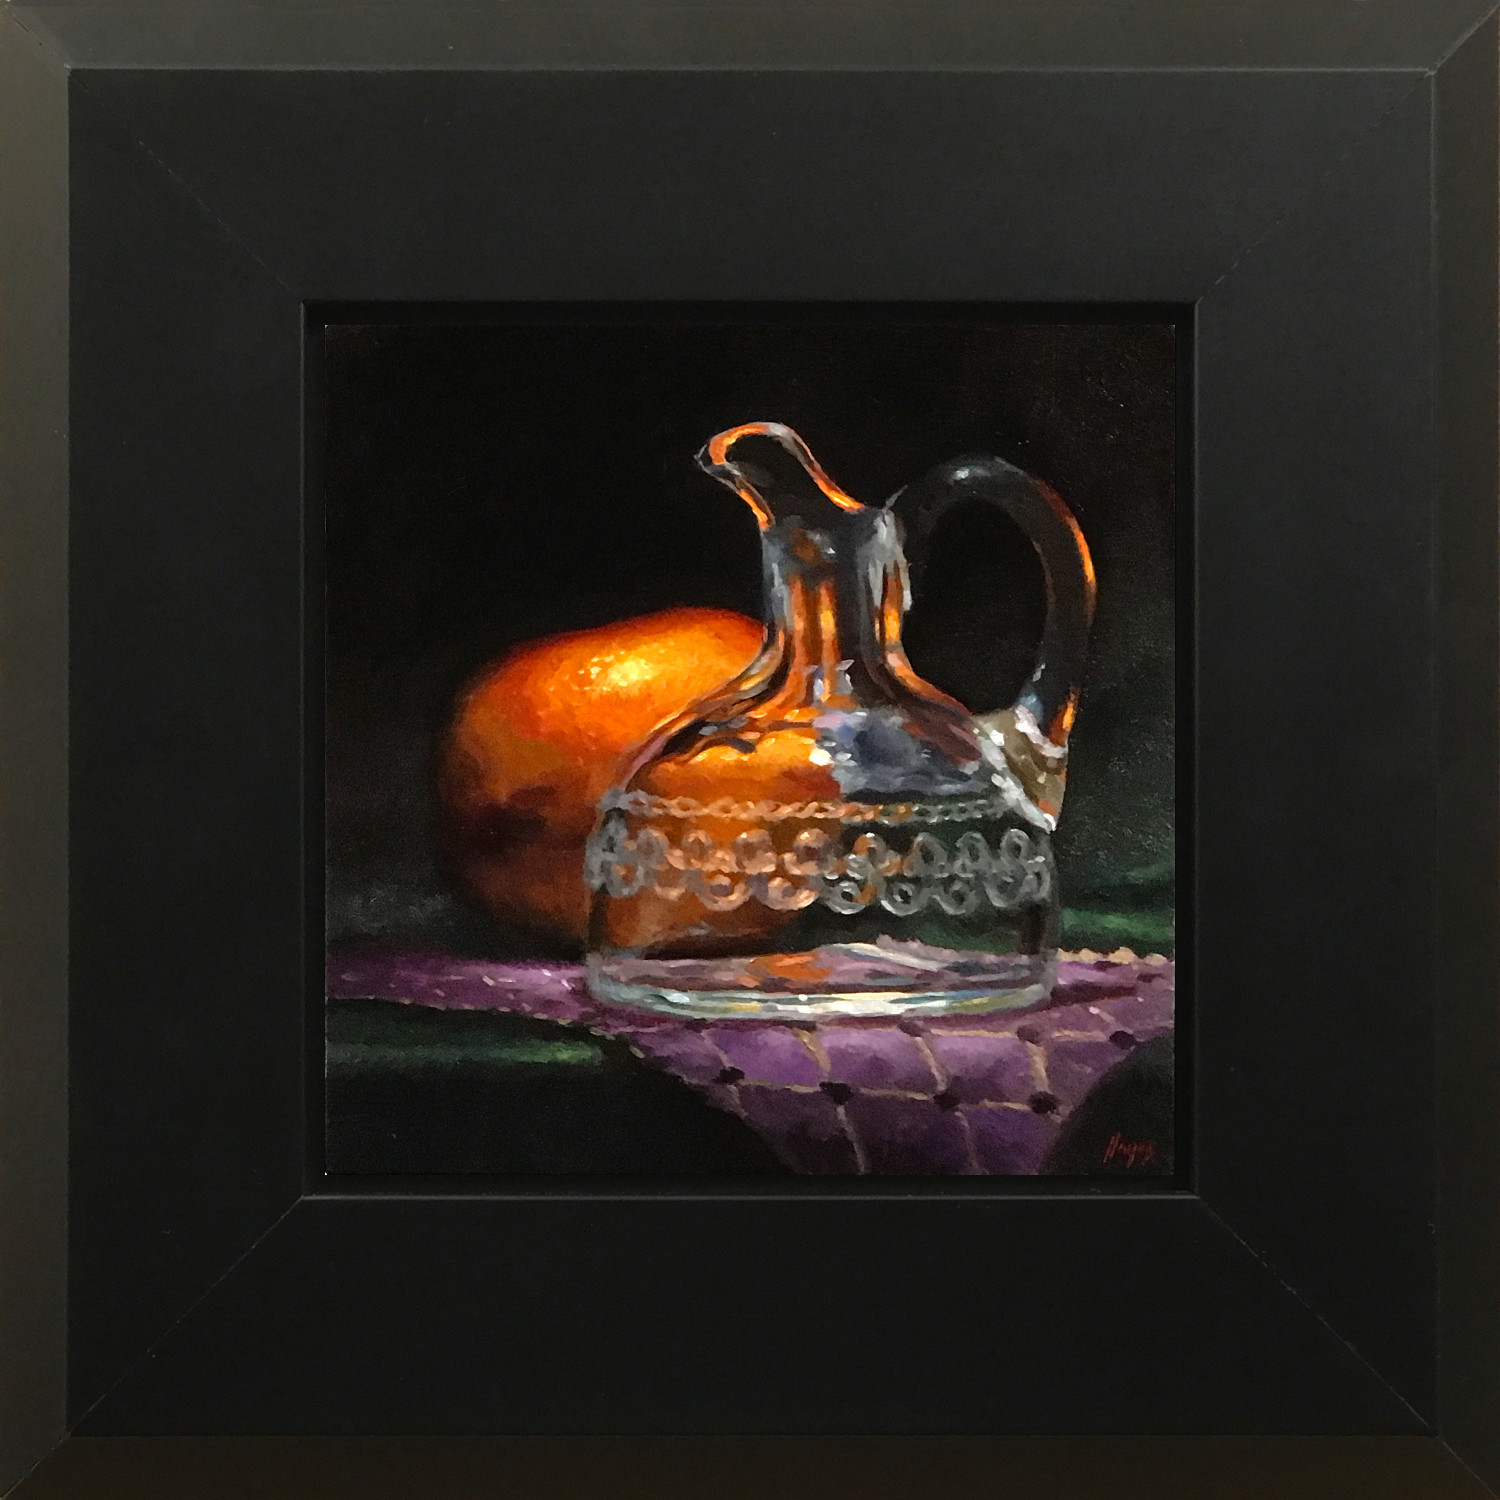 "Orange and Etched Glass Cruet" oil on panel, 5x5 inches.Contact me for more information about this painting